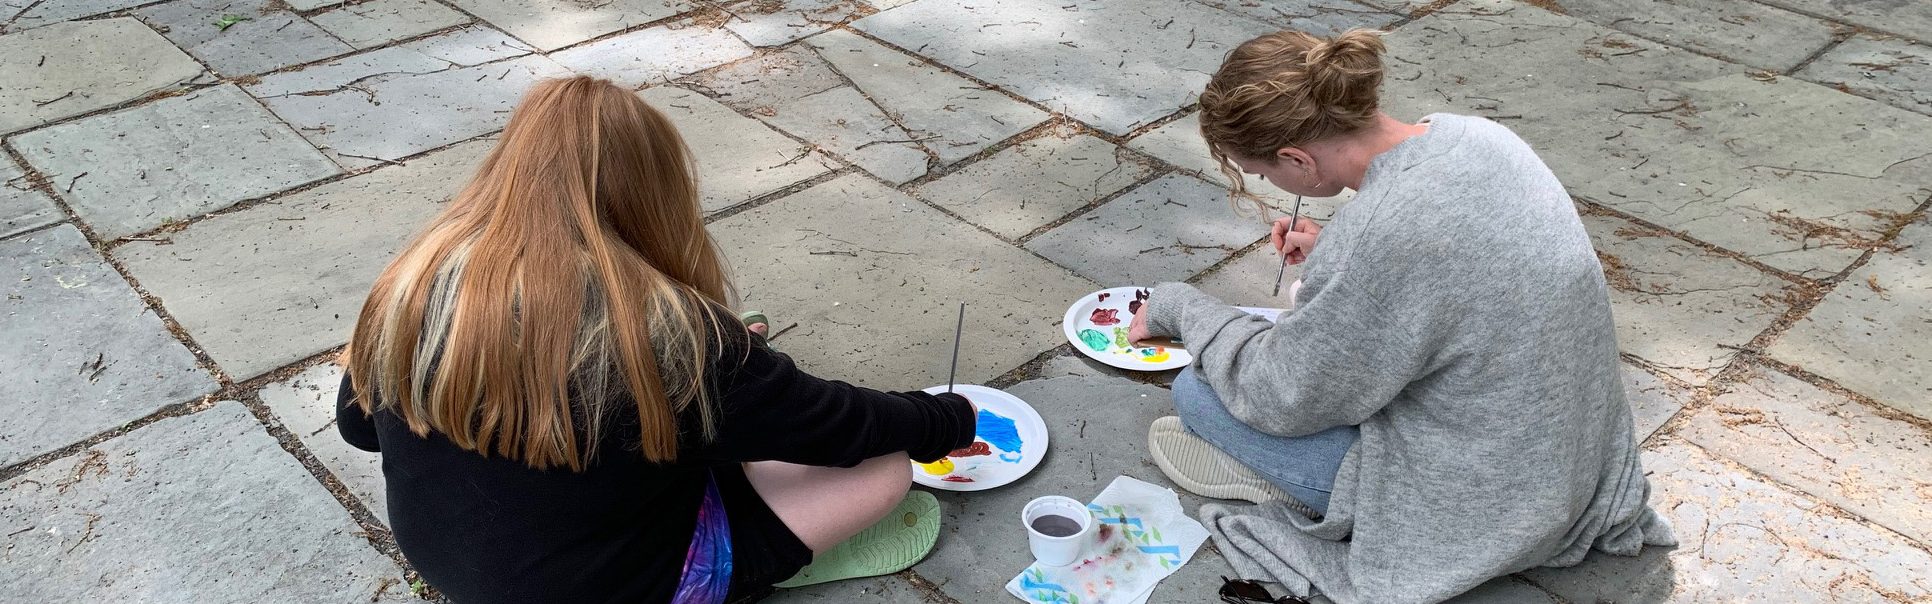 image of two students sitting outside on the ground and painting.